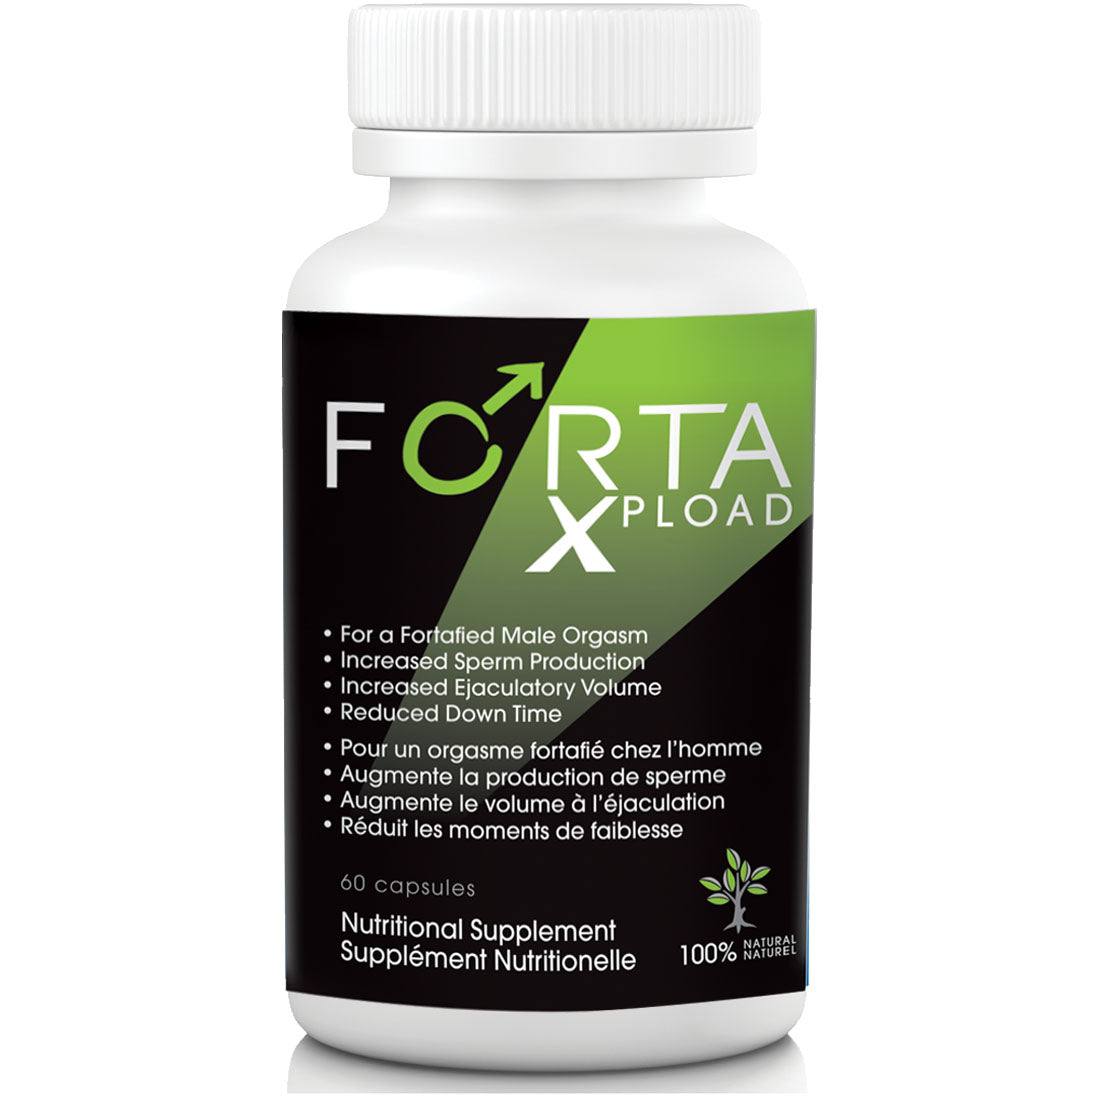 Forta Xpload (Supplier Discountinued)